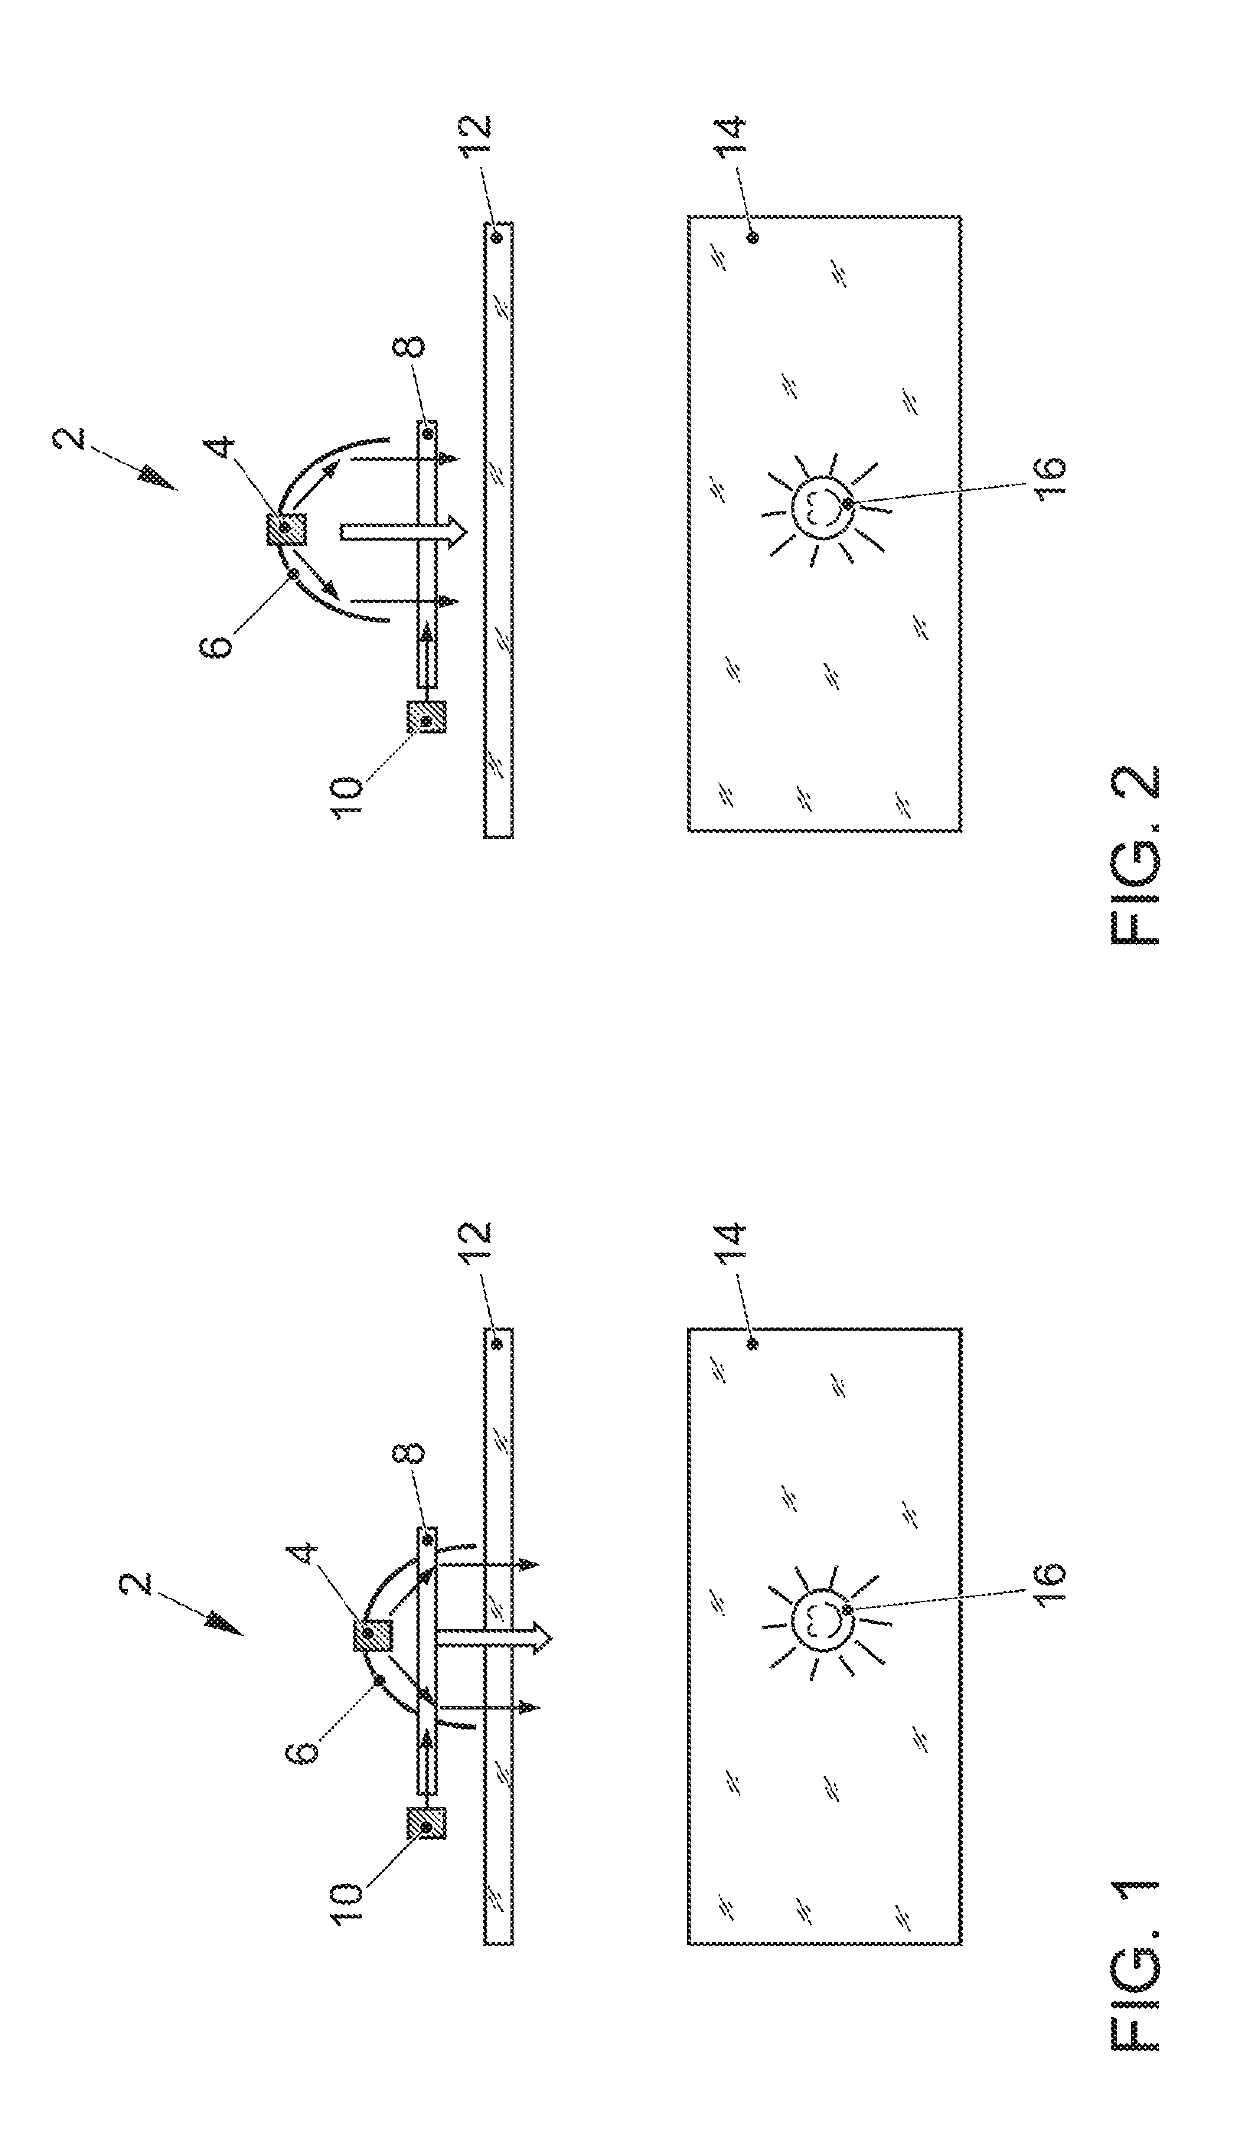 Lighting device for illuminating a passenger compartment of a vehicle